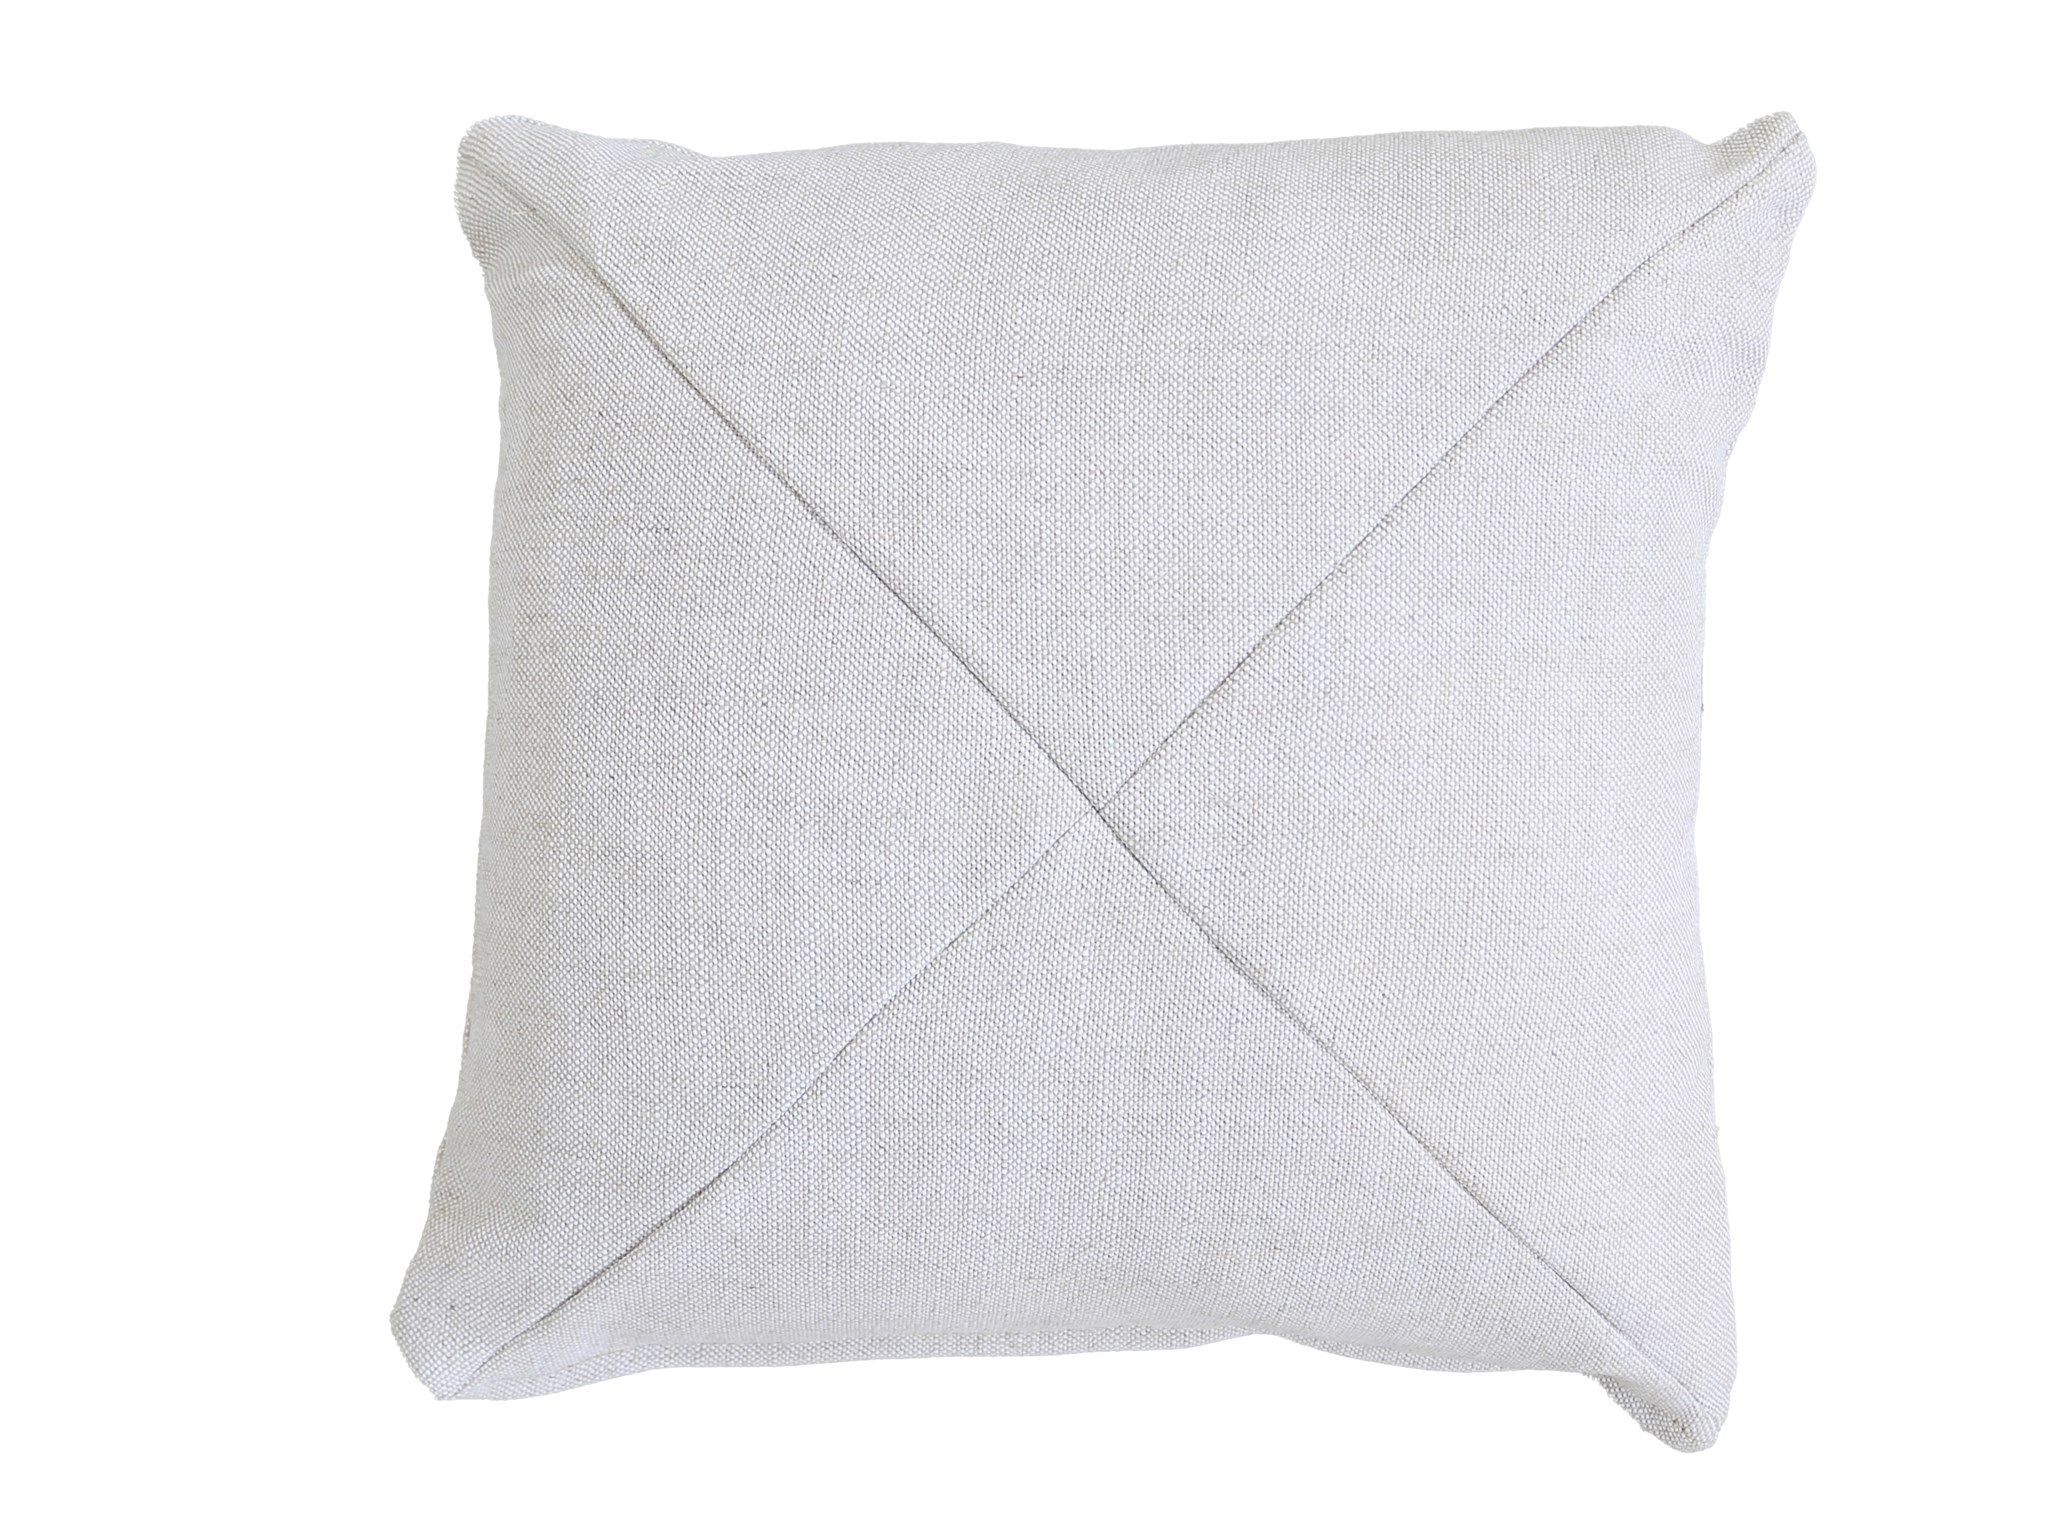 20" x 20" Pillow Outdoor Miter Cut, Special Order - White